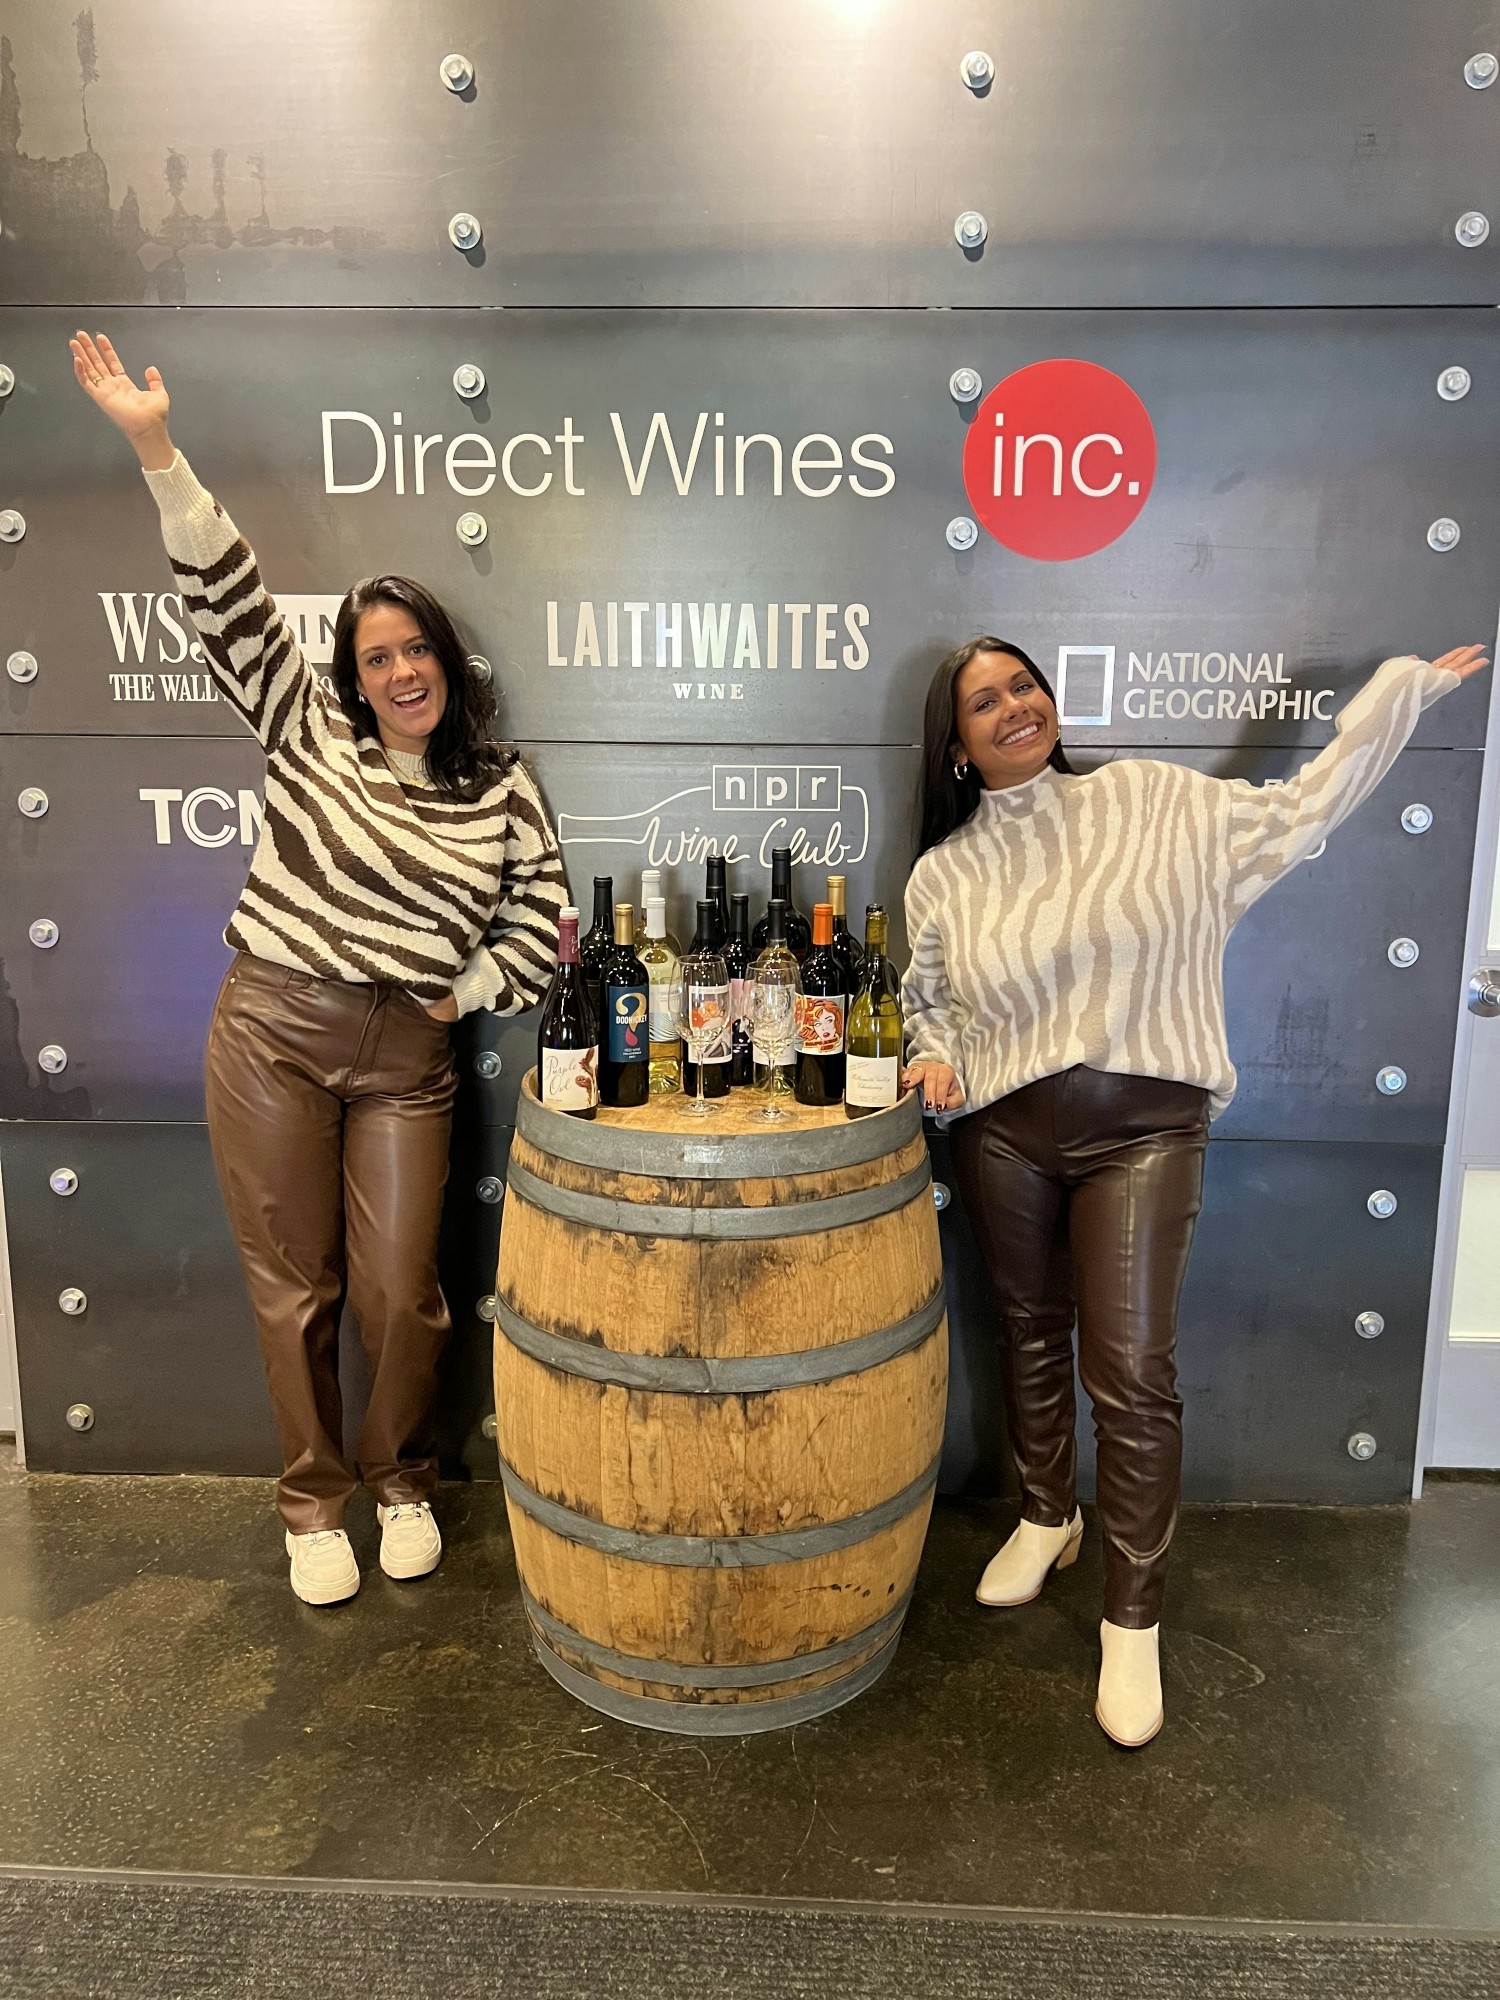 An accidental twinning day—discovered over a wine barrel at the entrance to our corporate office.